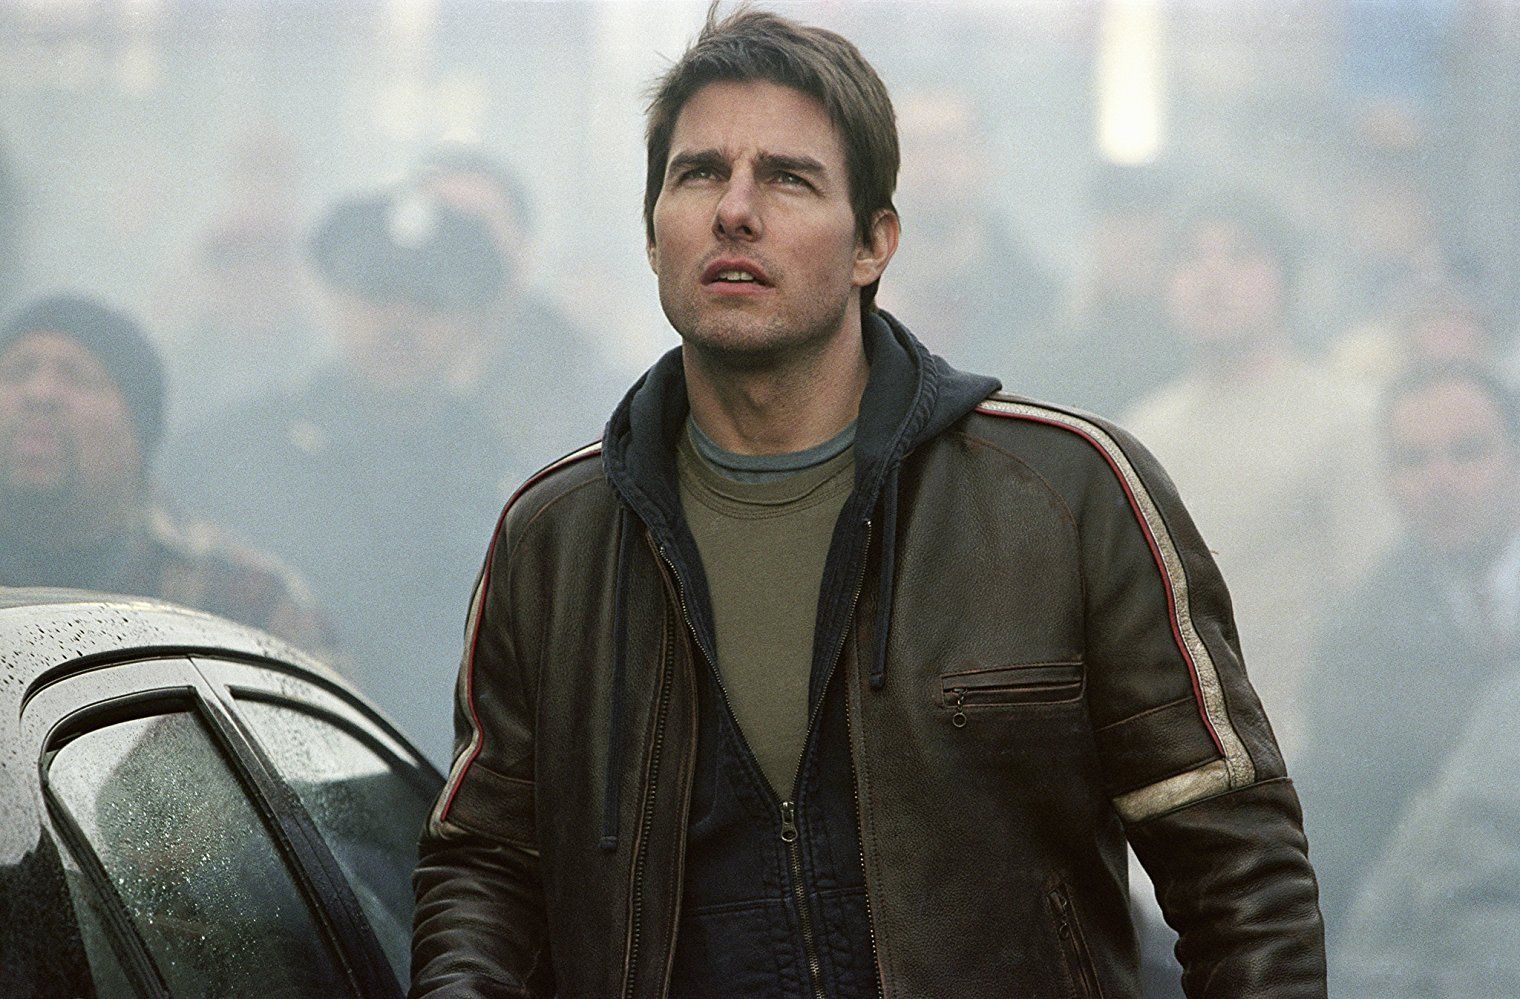 43 Best Tom Cruise Movies of All Time, Ranked